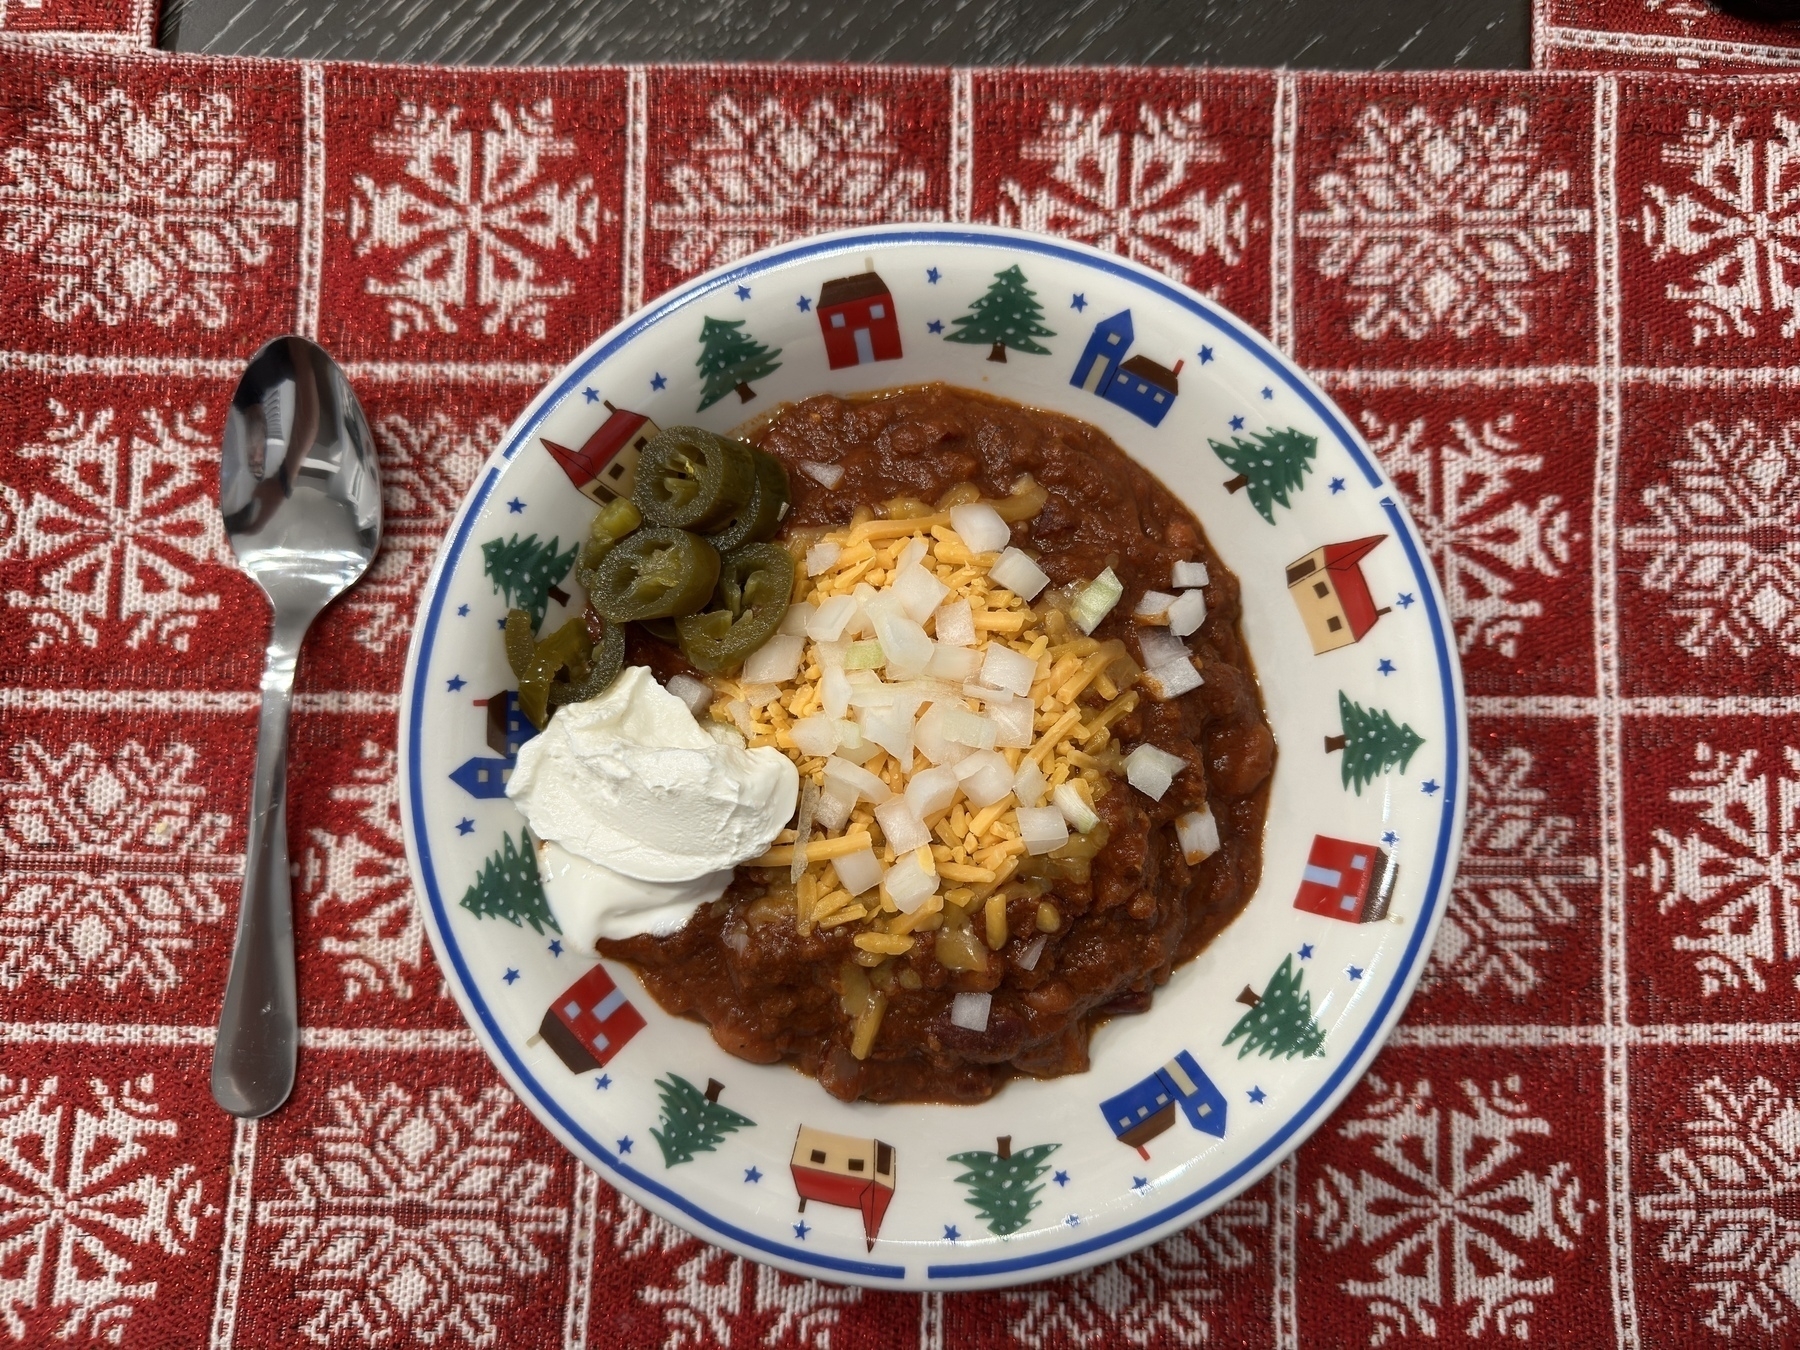 A bowl of homemade chili with cheese, a dollop of sour cream and jalapenos on a holiday placemat. A spoon sits to the left of the bowl.